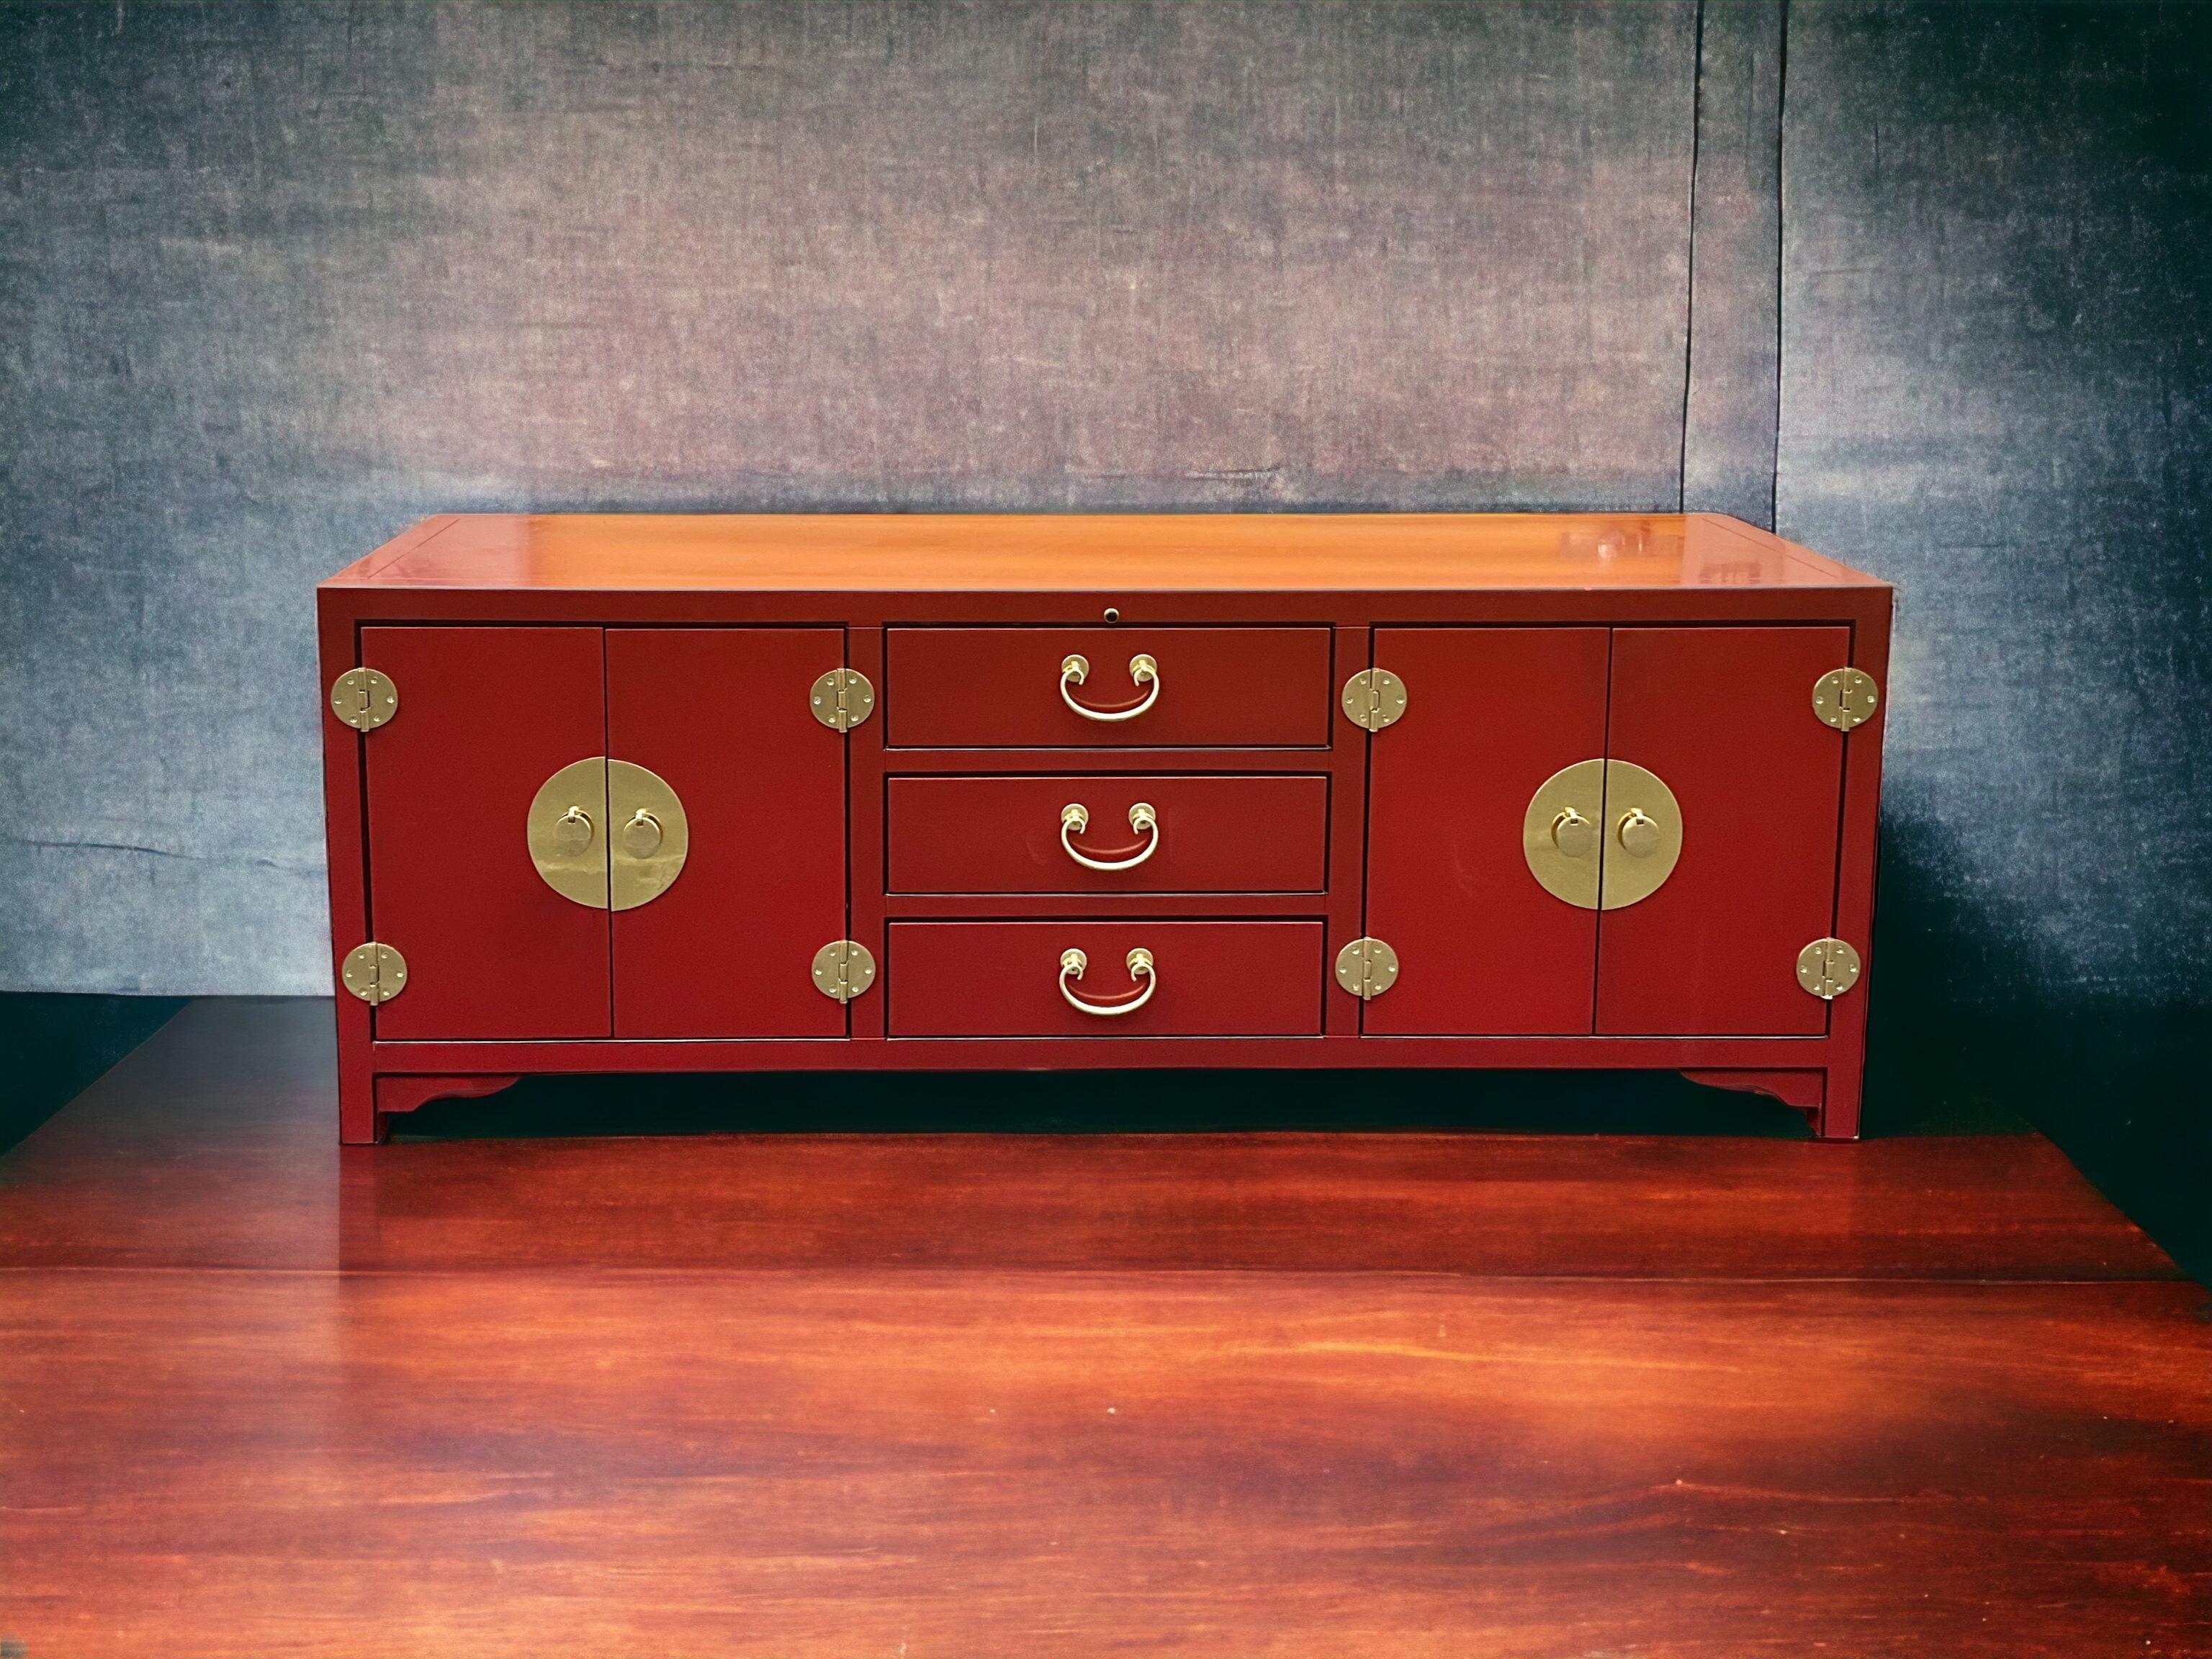 This is a killer credenza! It has Asian styling with decorative brass hardware. The red lacquer finish is piped in black. It has quite a bit of storage and is in very good condition.

My shipping is for the Continental US only and is running two to